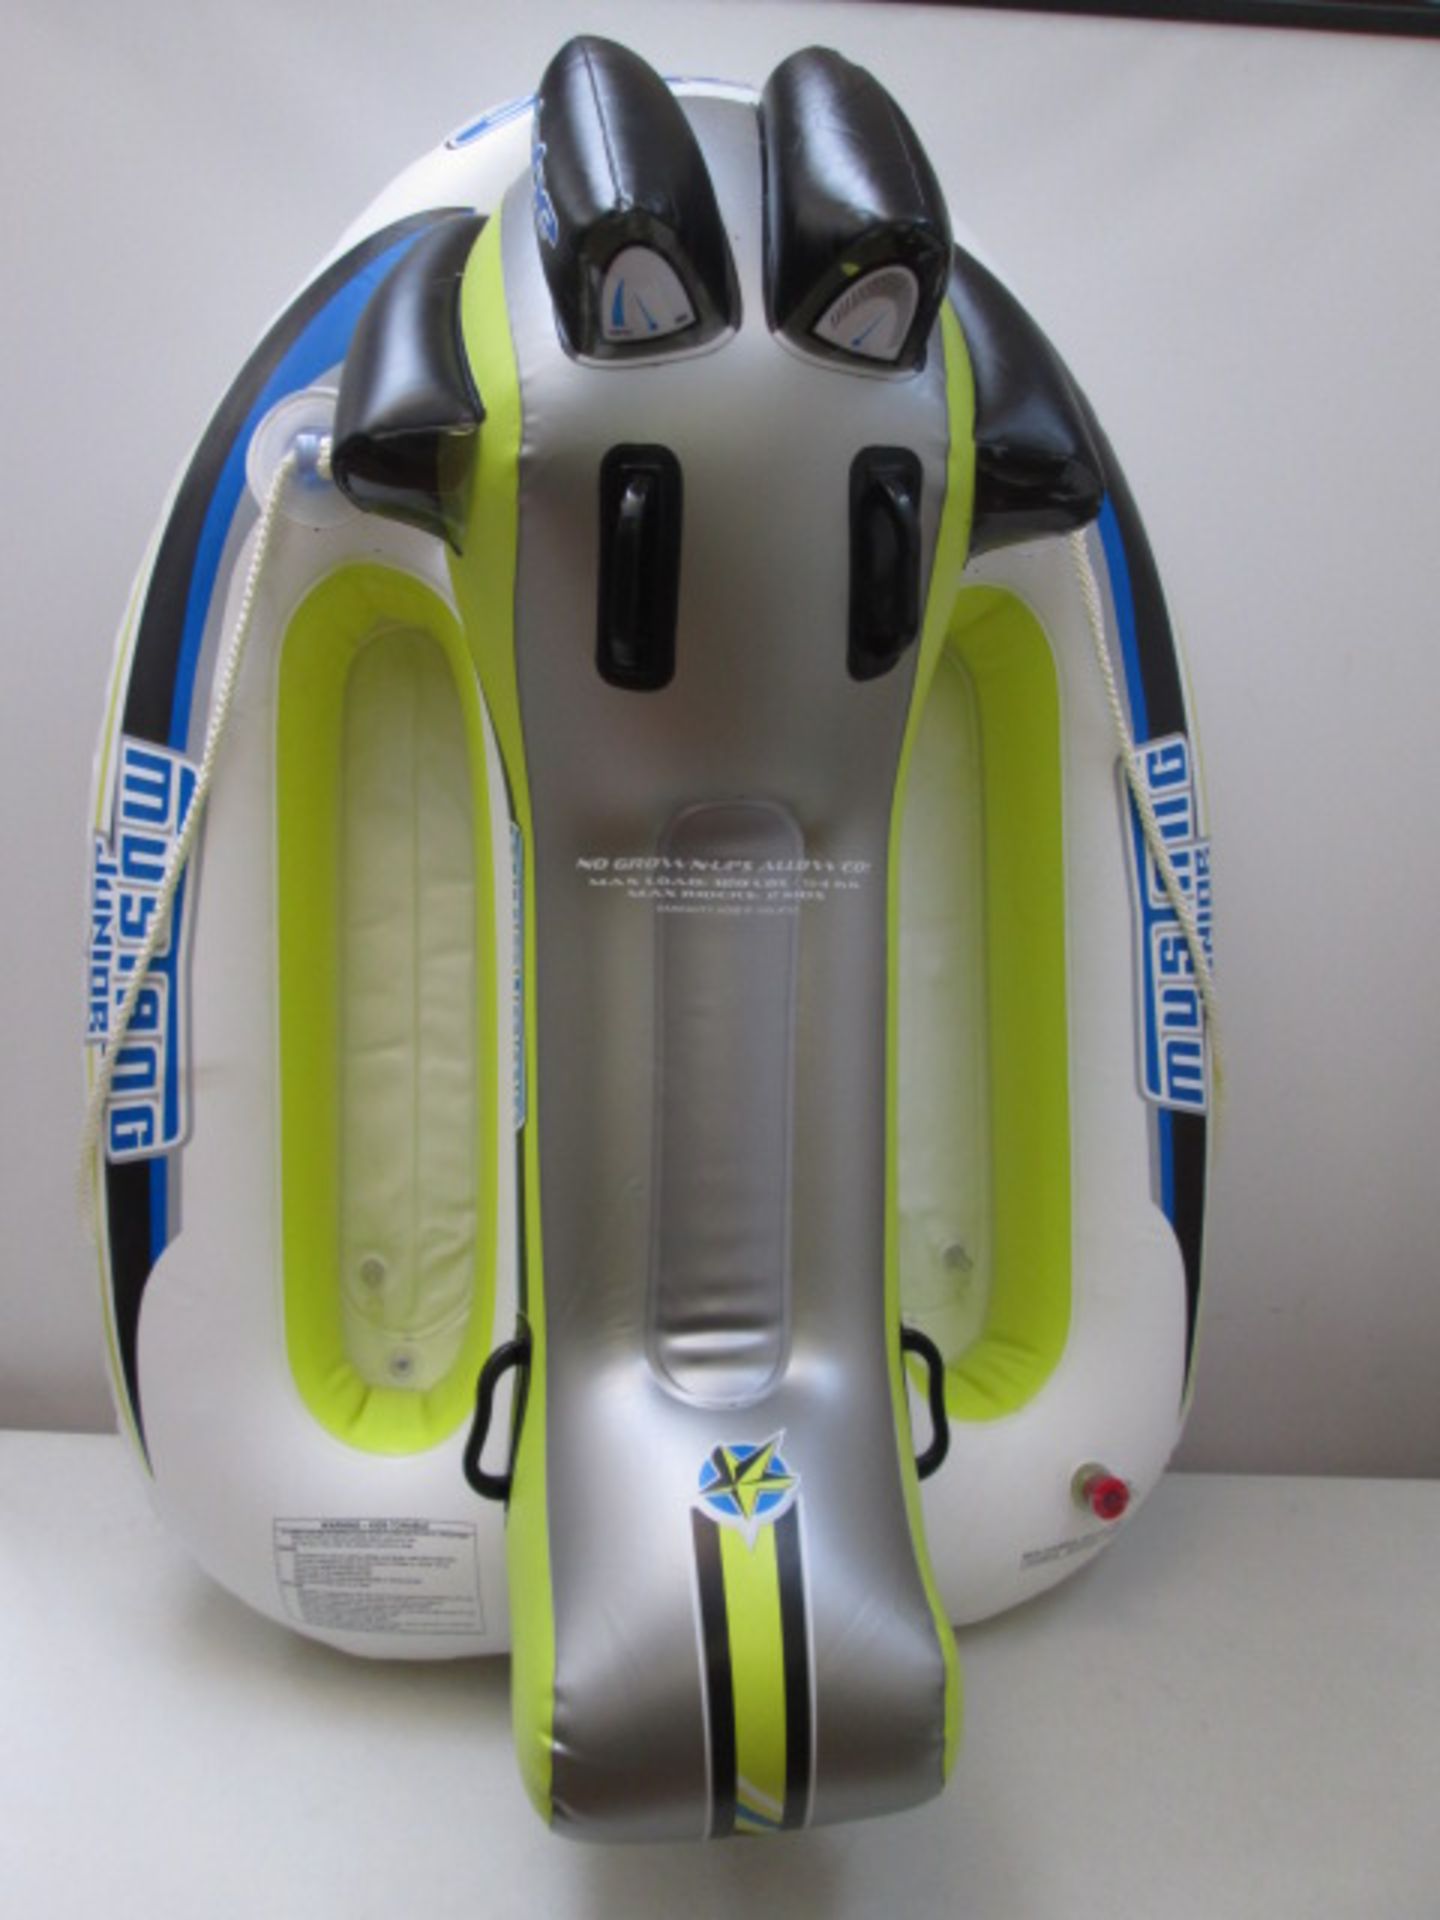 Jobe Mustang Junior Inflatable Childs Jetski, Max Capacity 120lbs (54kg). Comes with Hand Pump & - Image 2 of 3